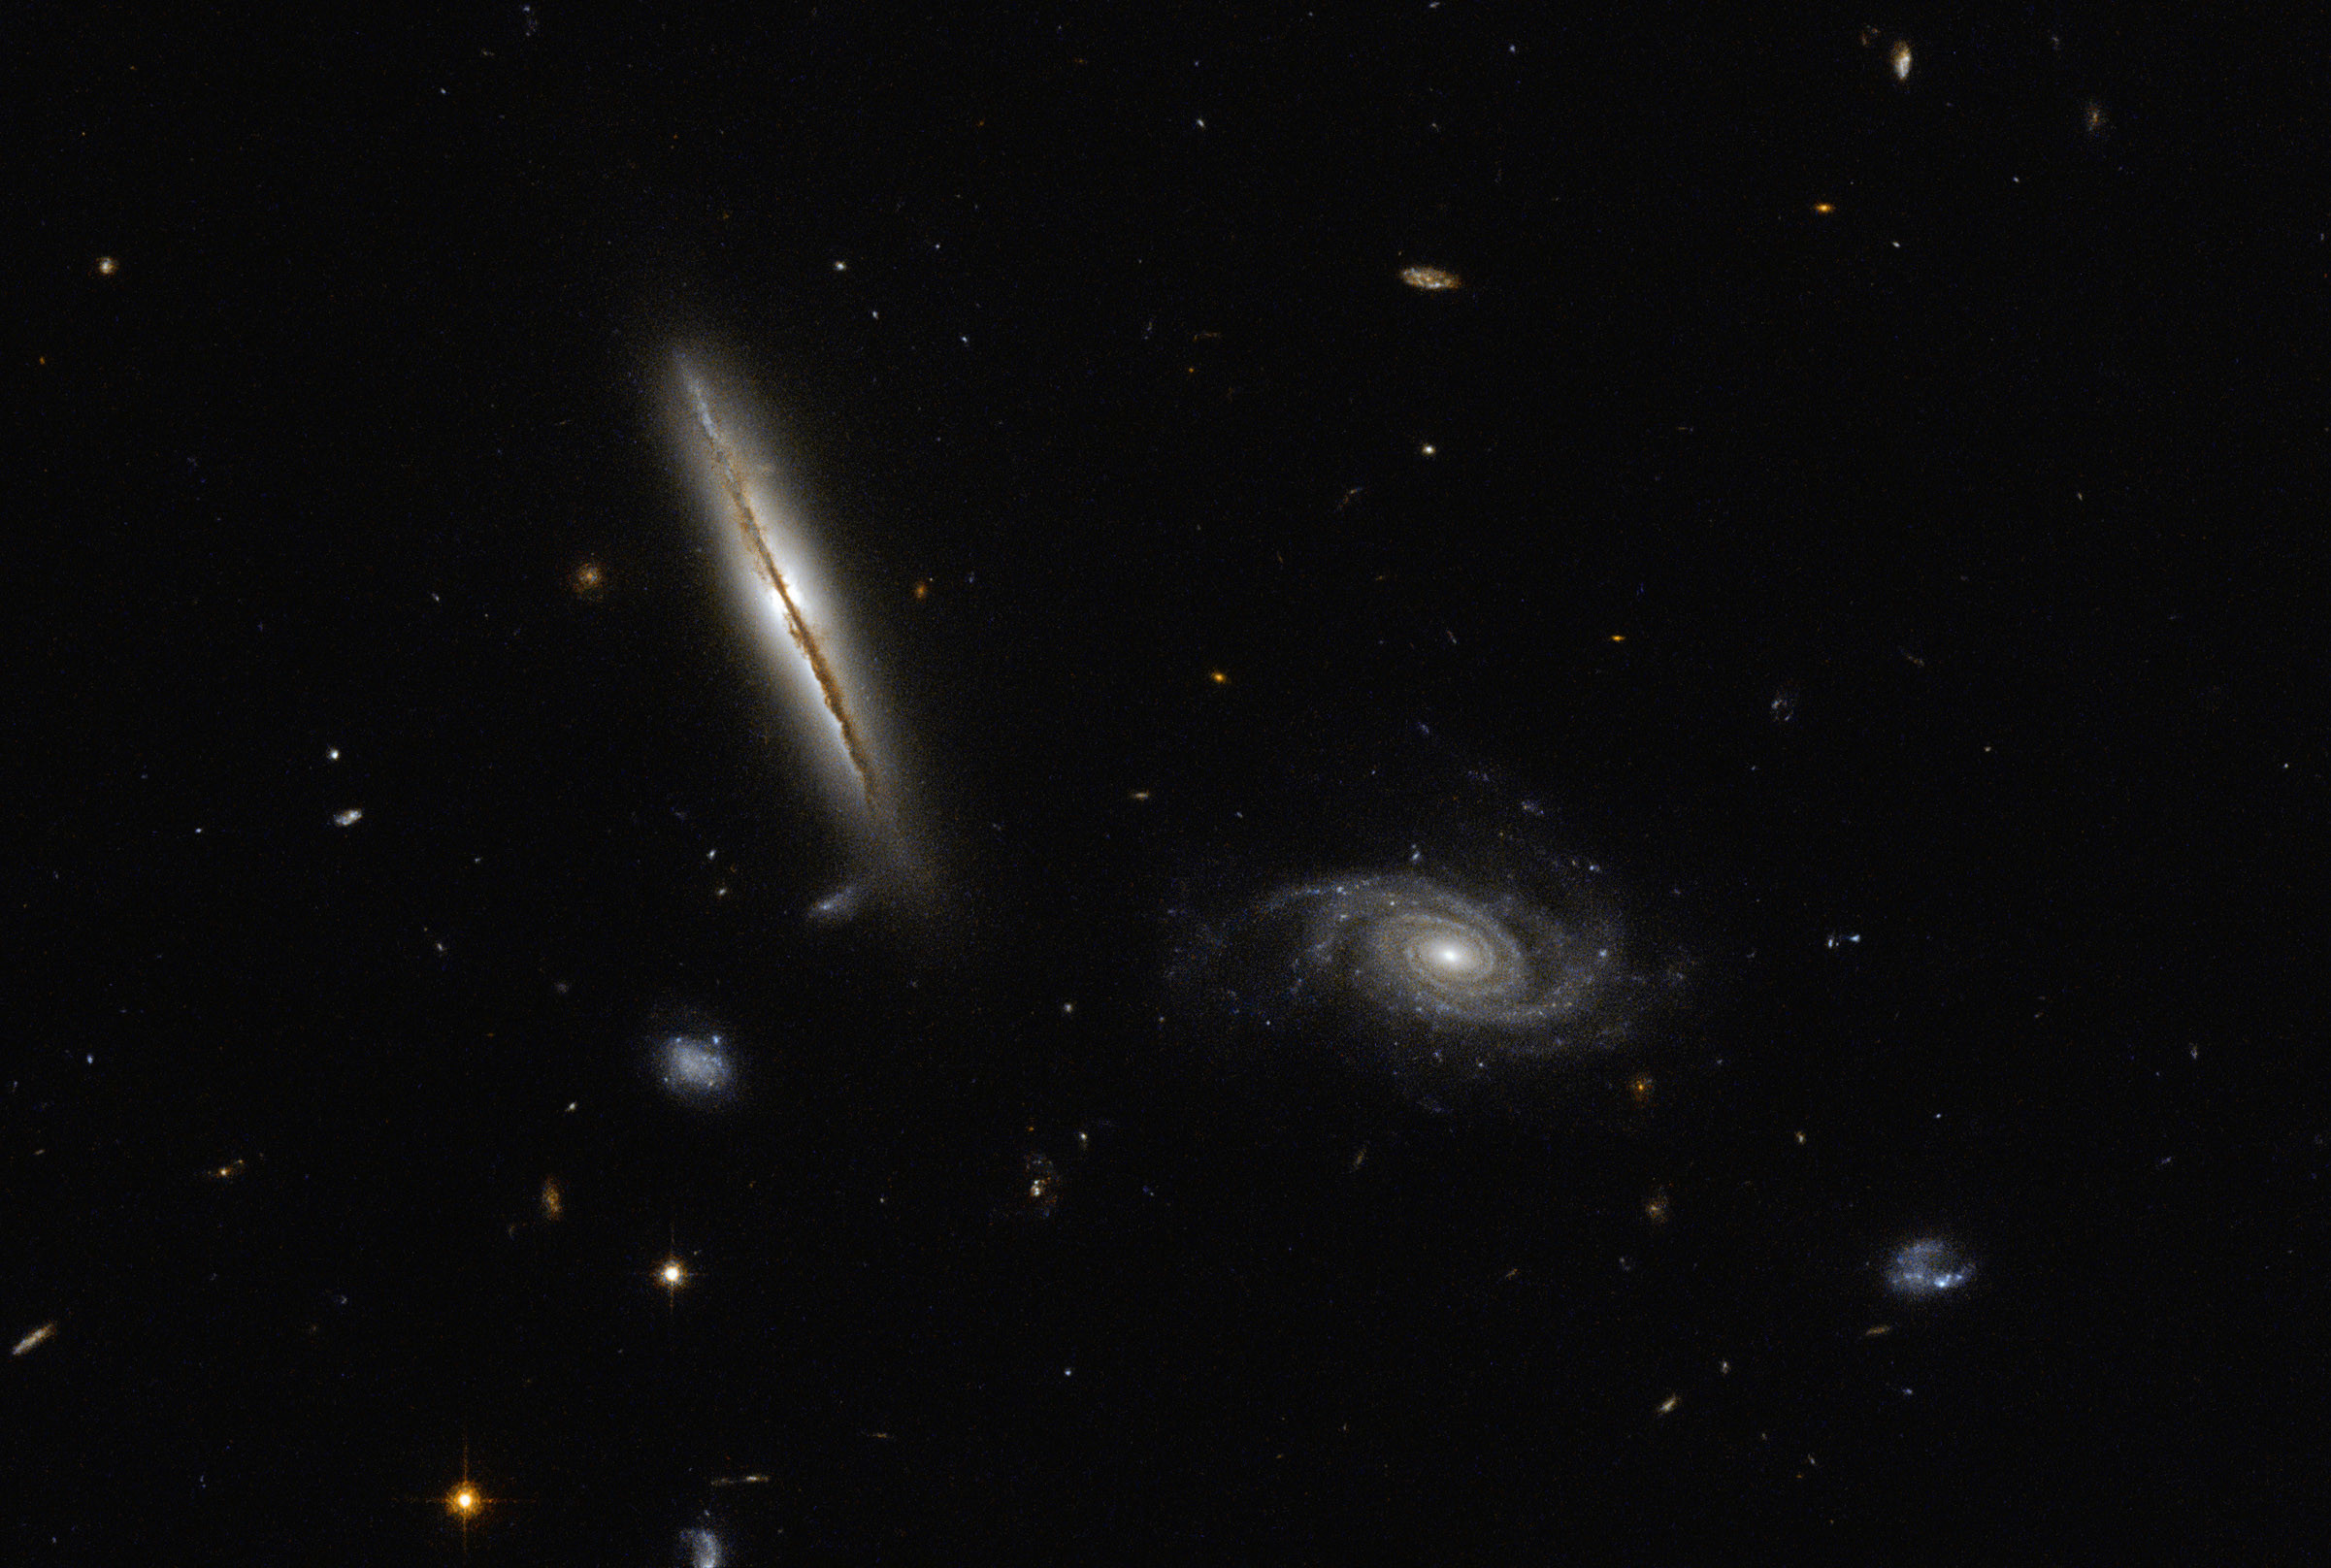 Hubble Space Telescope image of spiral galaxies LO95 0313 192 left and